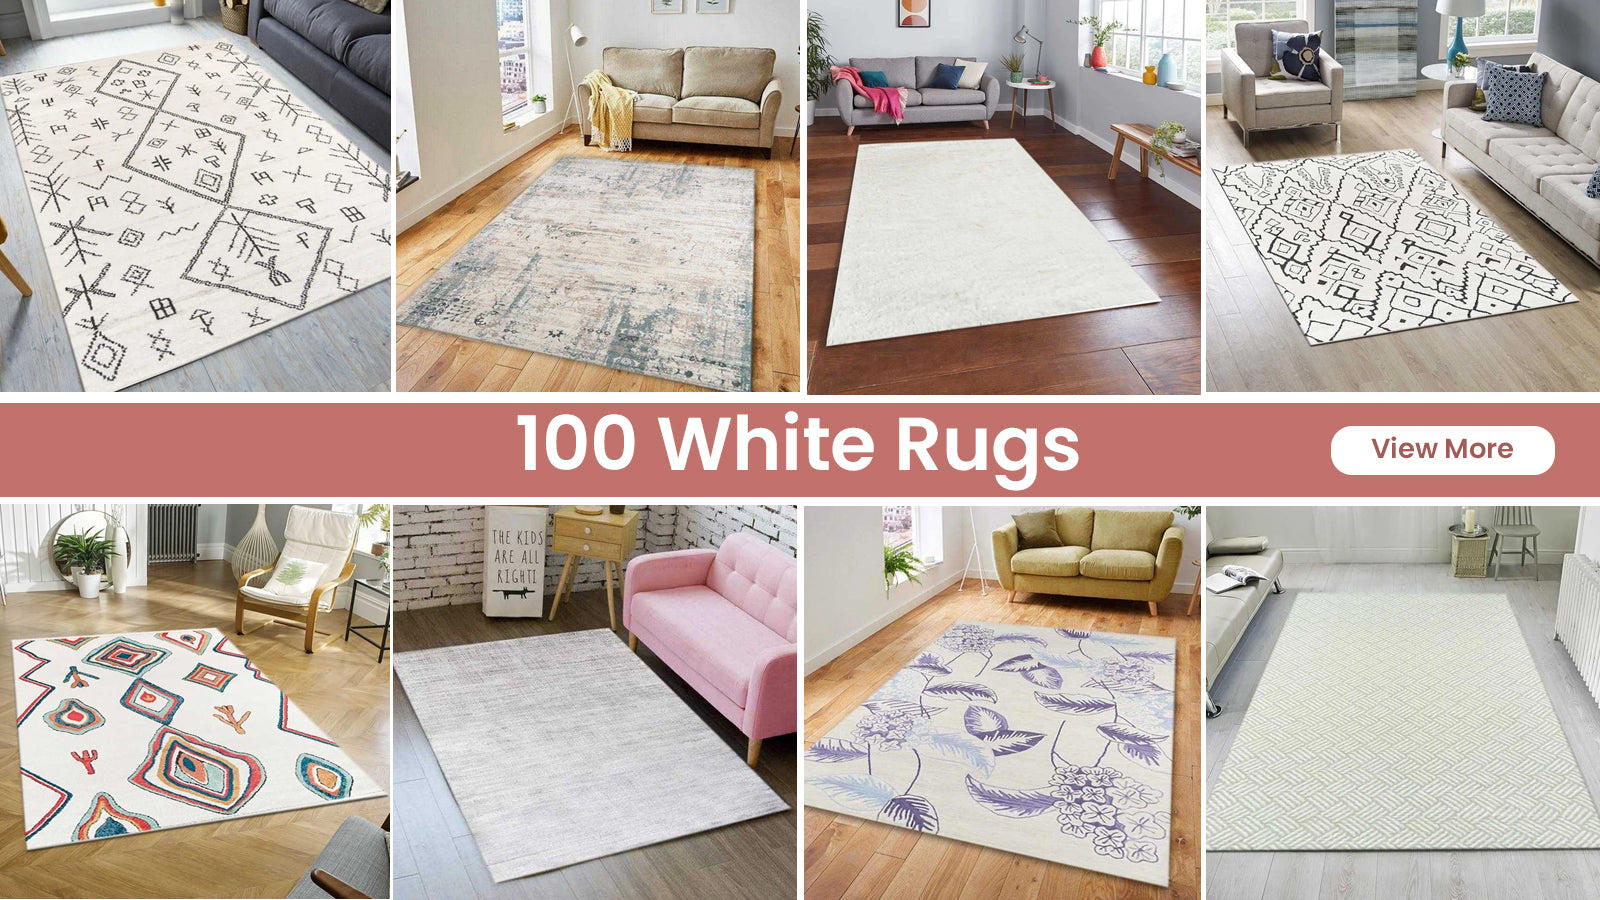 7 Tips For Using White Rugs to Decorate Your Home - RugKnots